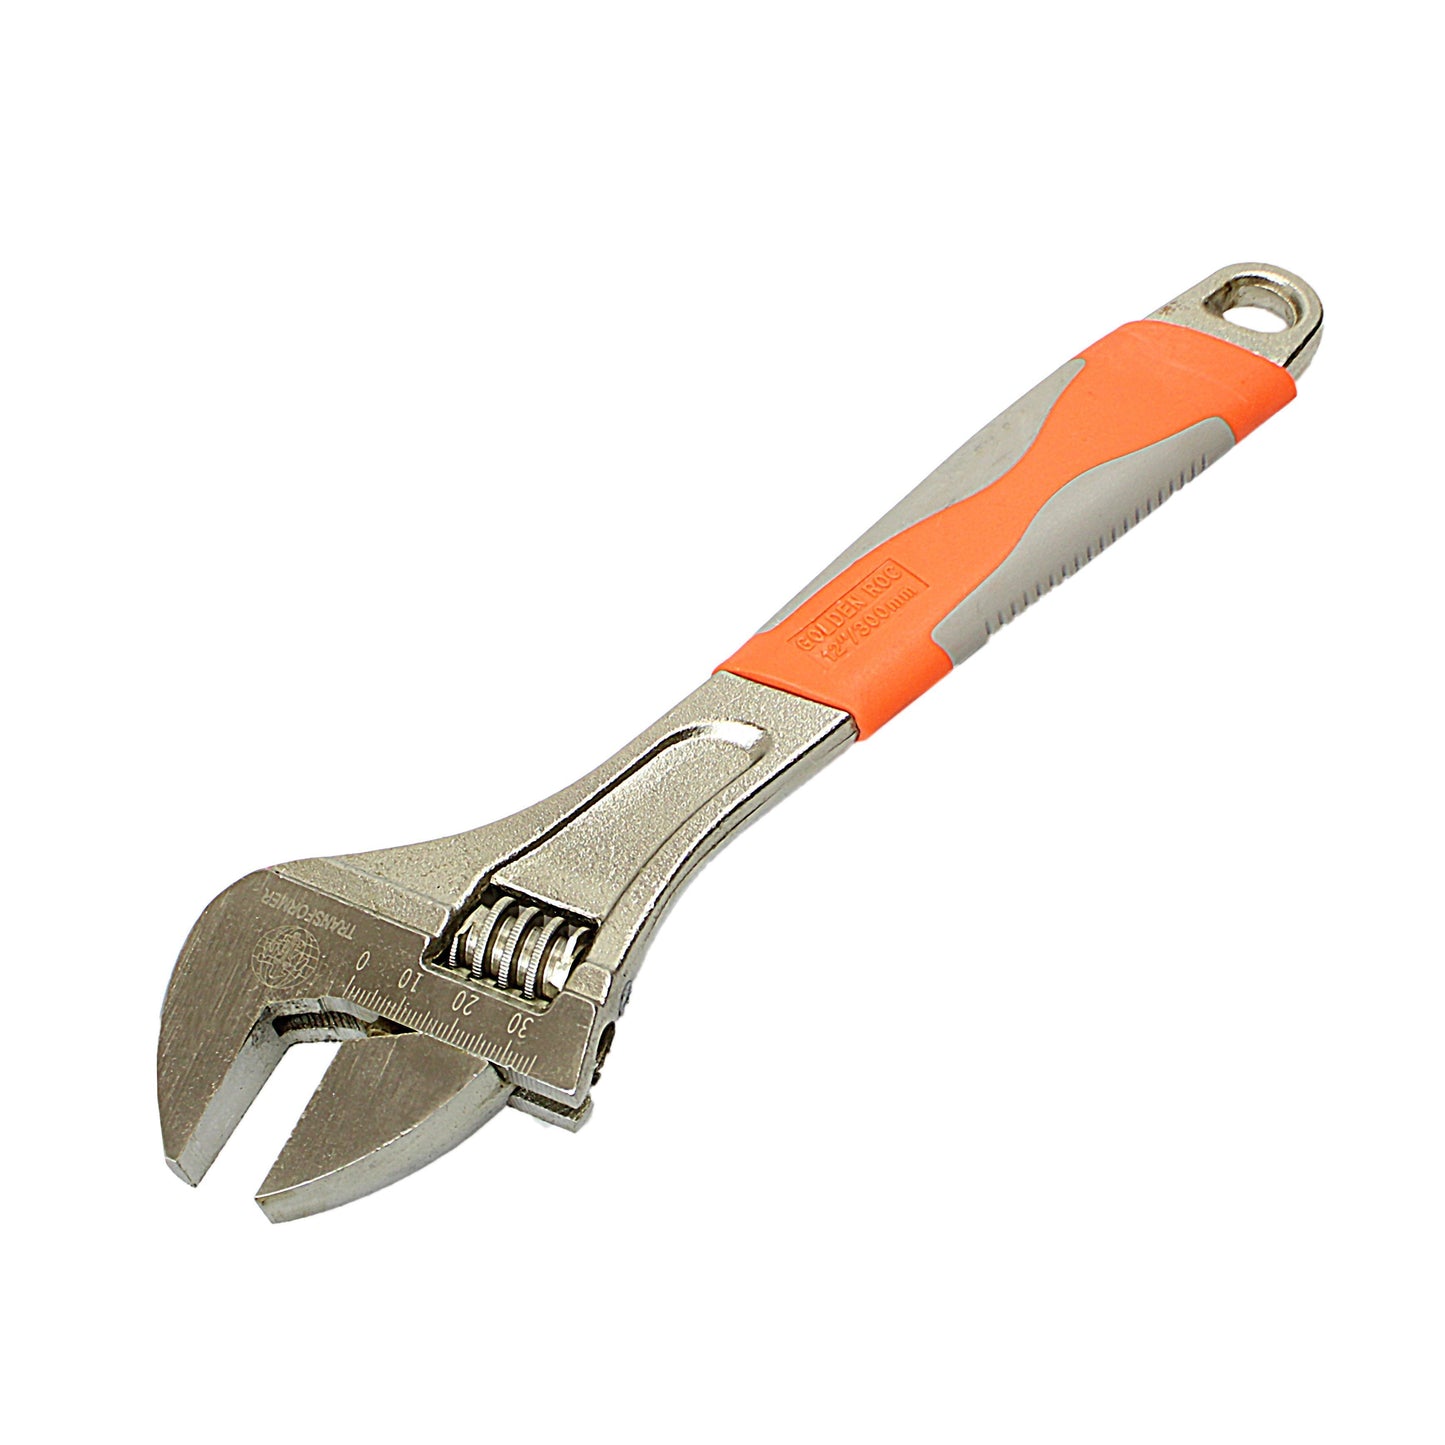 Adjustable Wrench Large Opening Spanner Wrench Nut Key Hand Tool Diy 0776 (Parcel Rate)